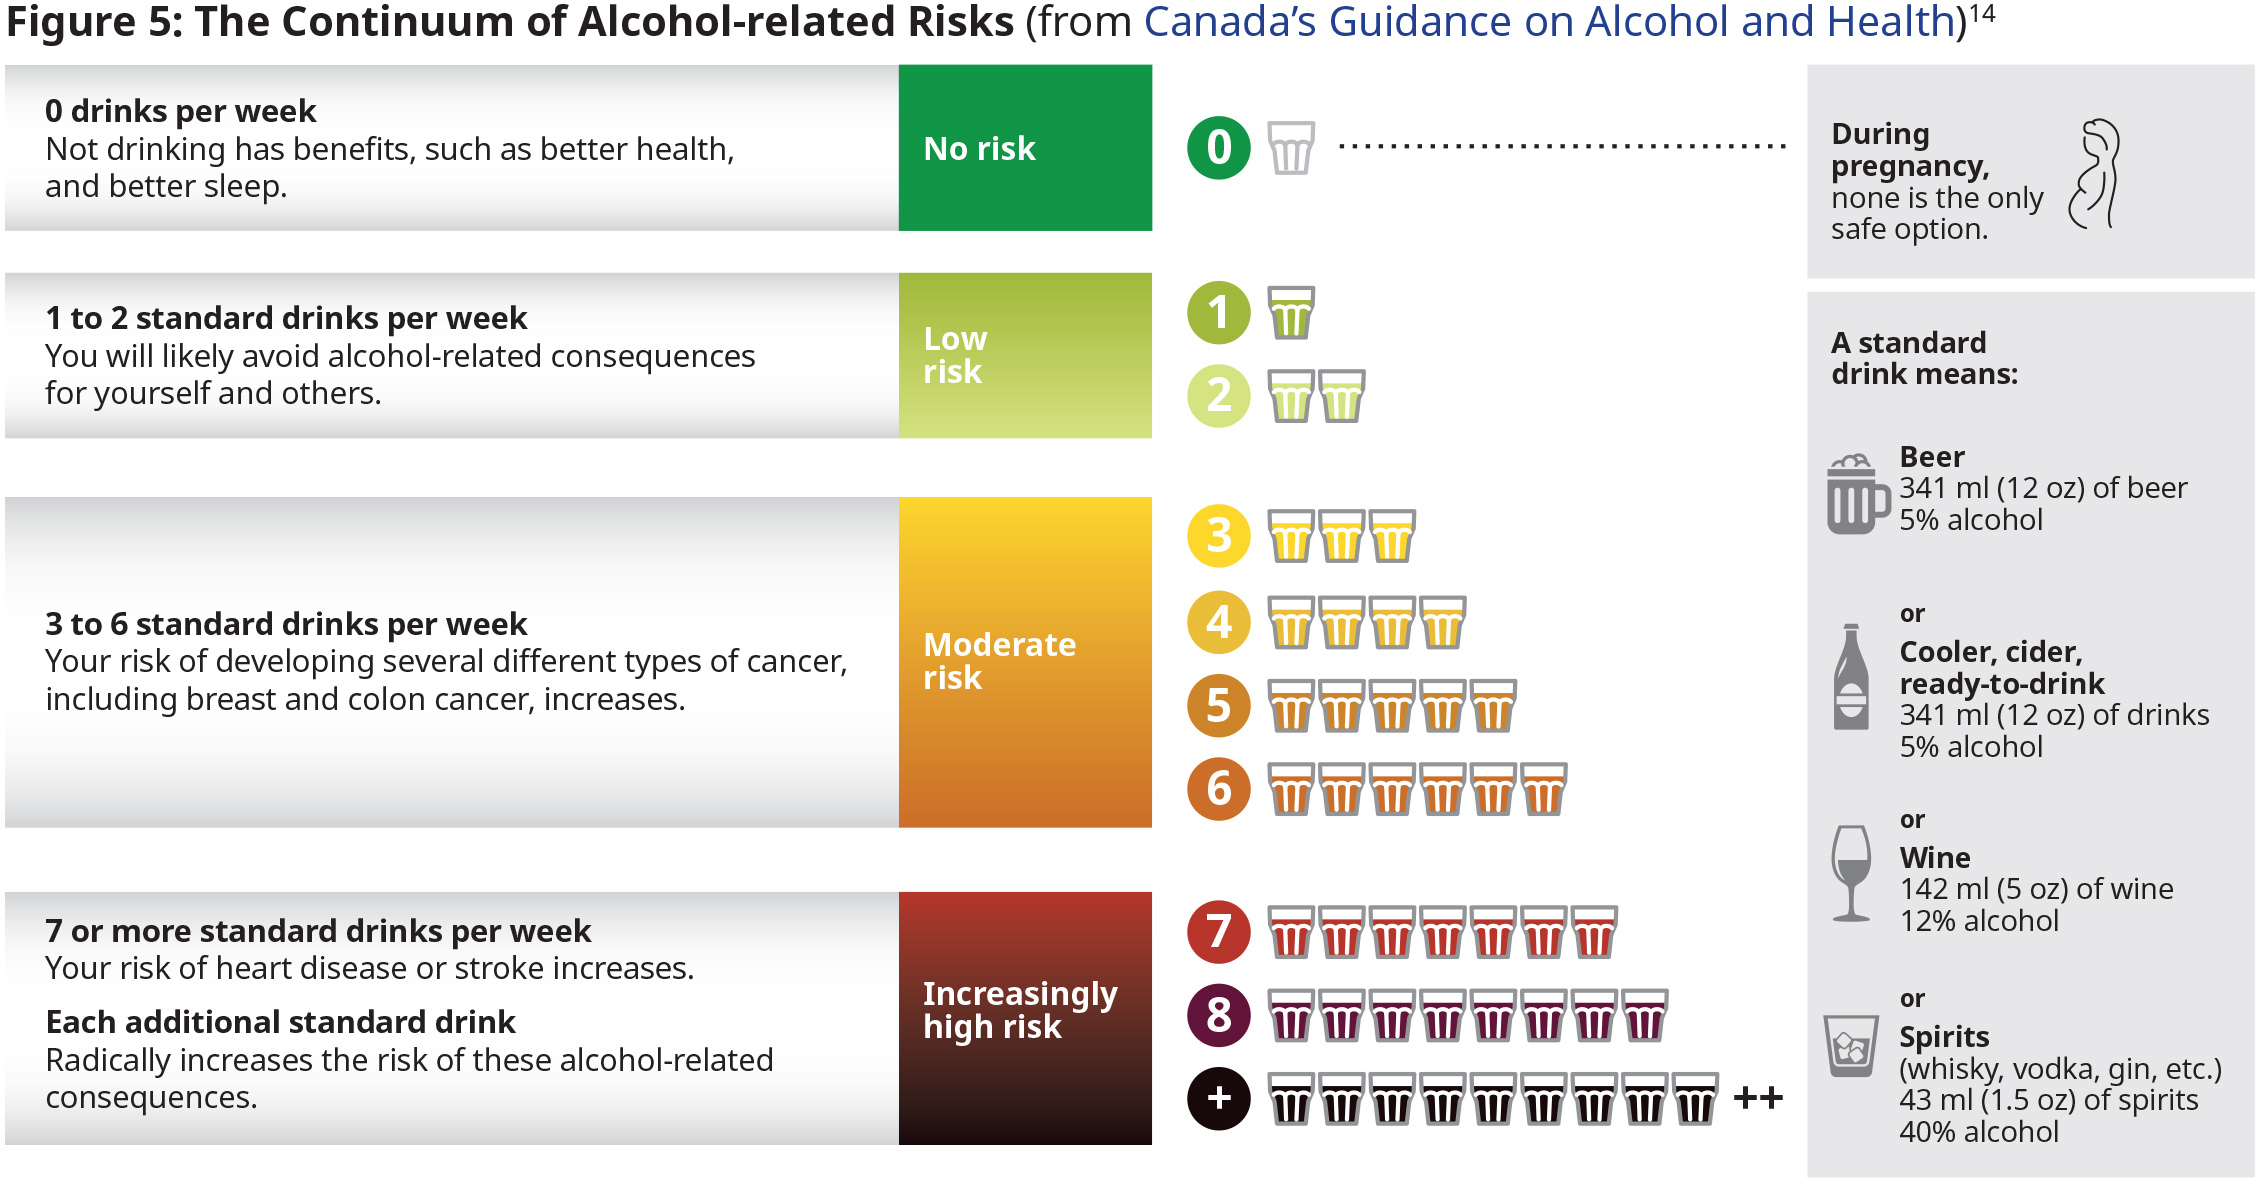 The Continuum of Alcohol-related Risks